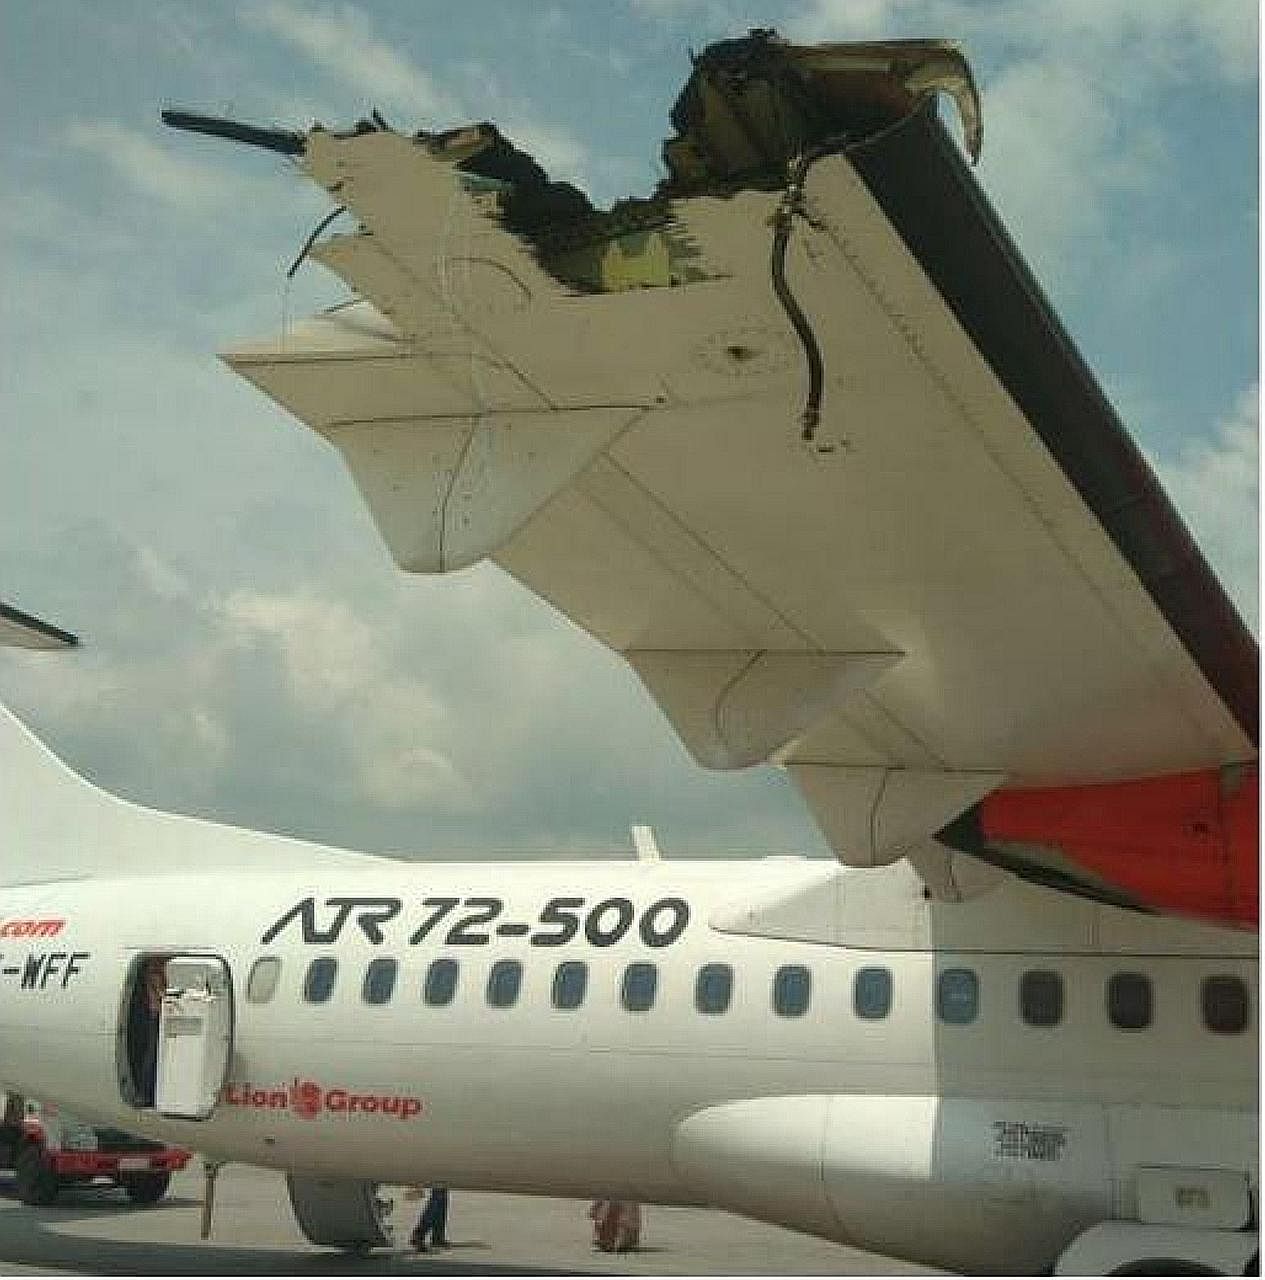 Pictures on social media showed the damaged wings of a Wings Air ATR-72 and a Lion Air plane. The incident took place yesterday at the Kualanamu International Airport in Medan, North Sumatra.